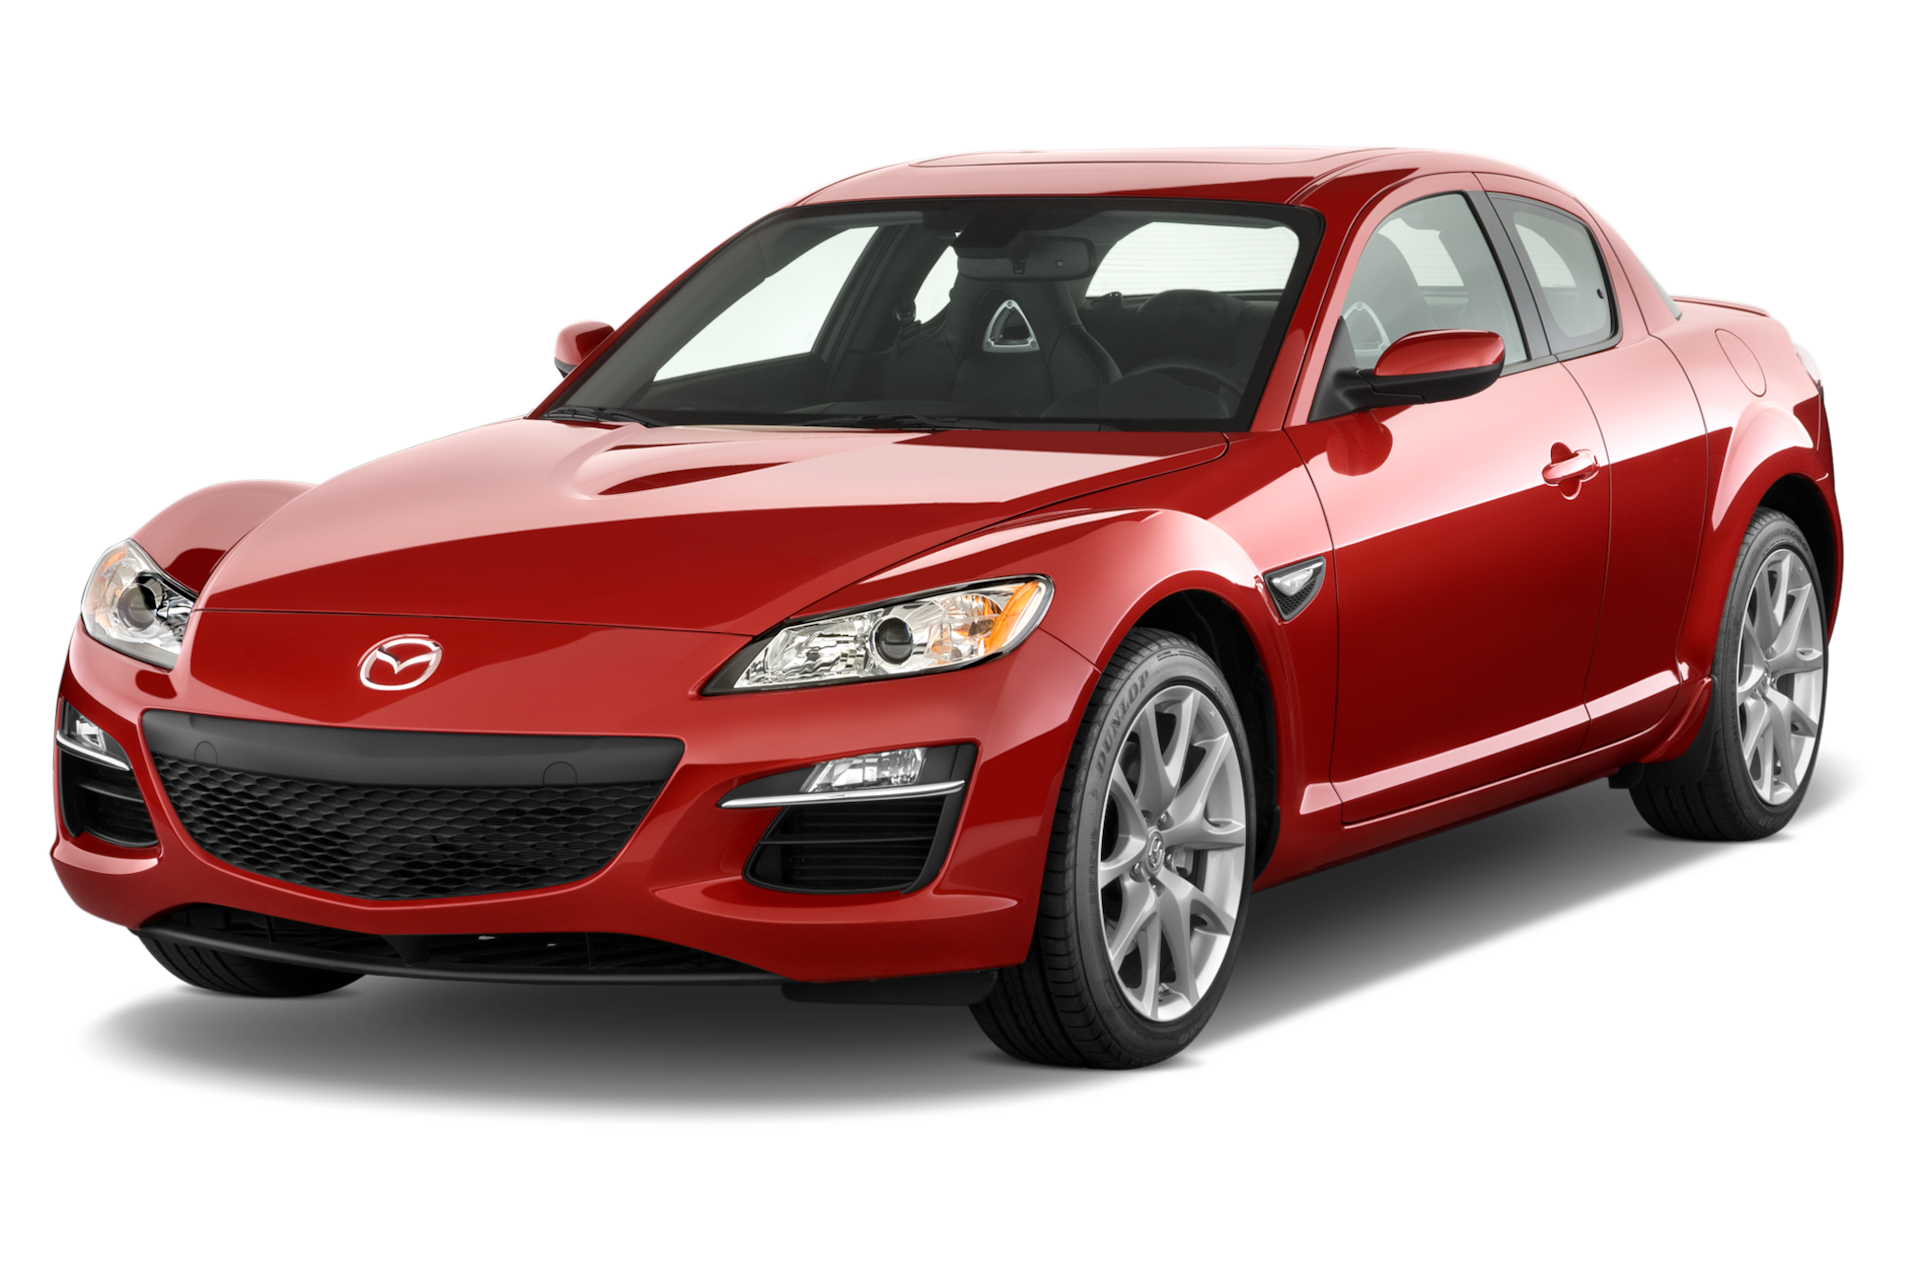 2010 Mazda RX-8 Prices, Reviews, and Photos - MotorTrend